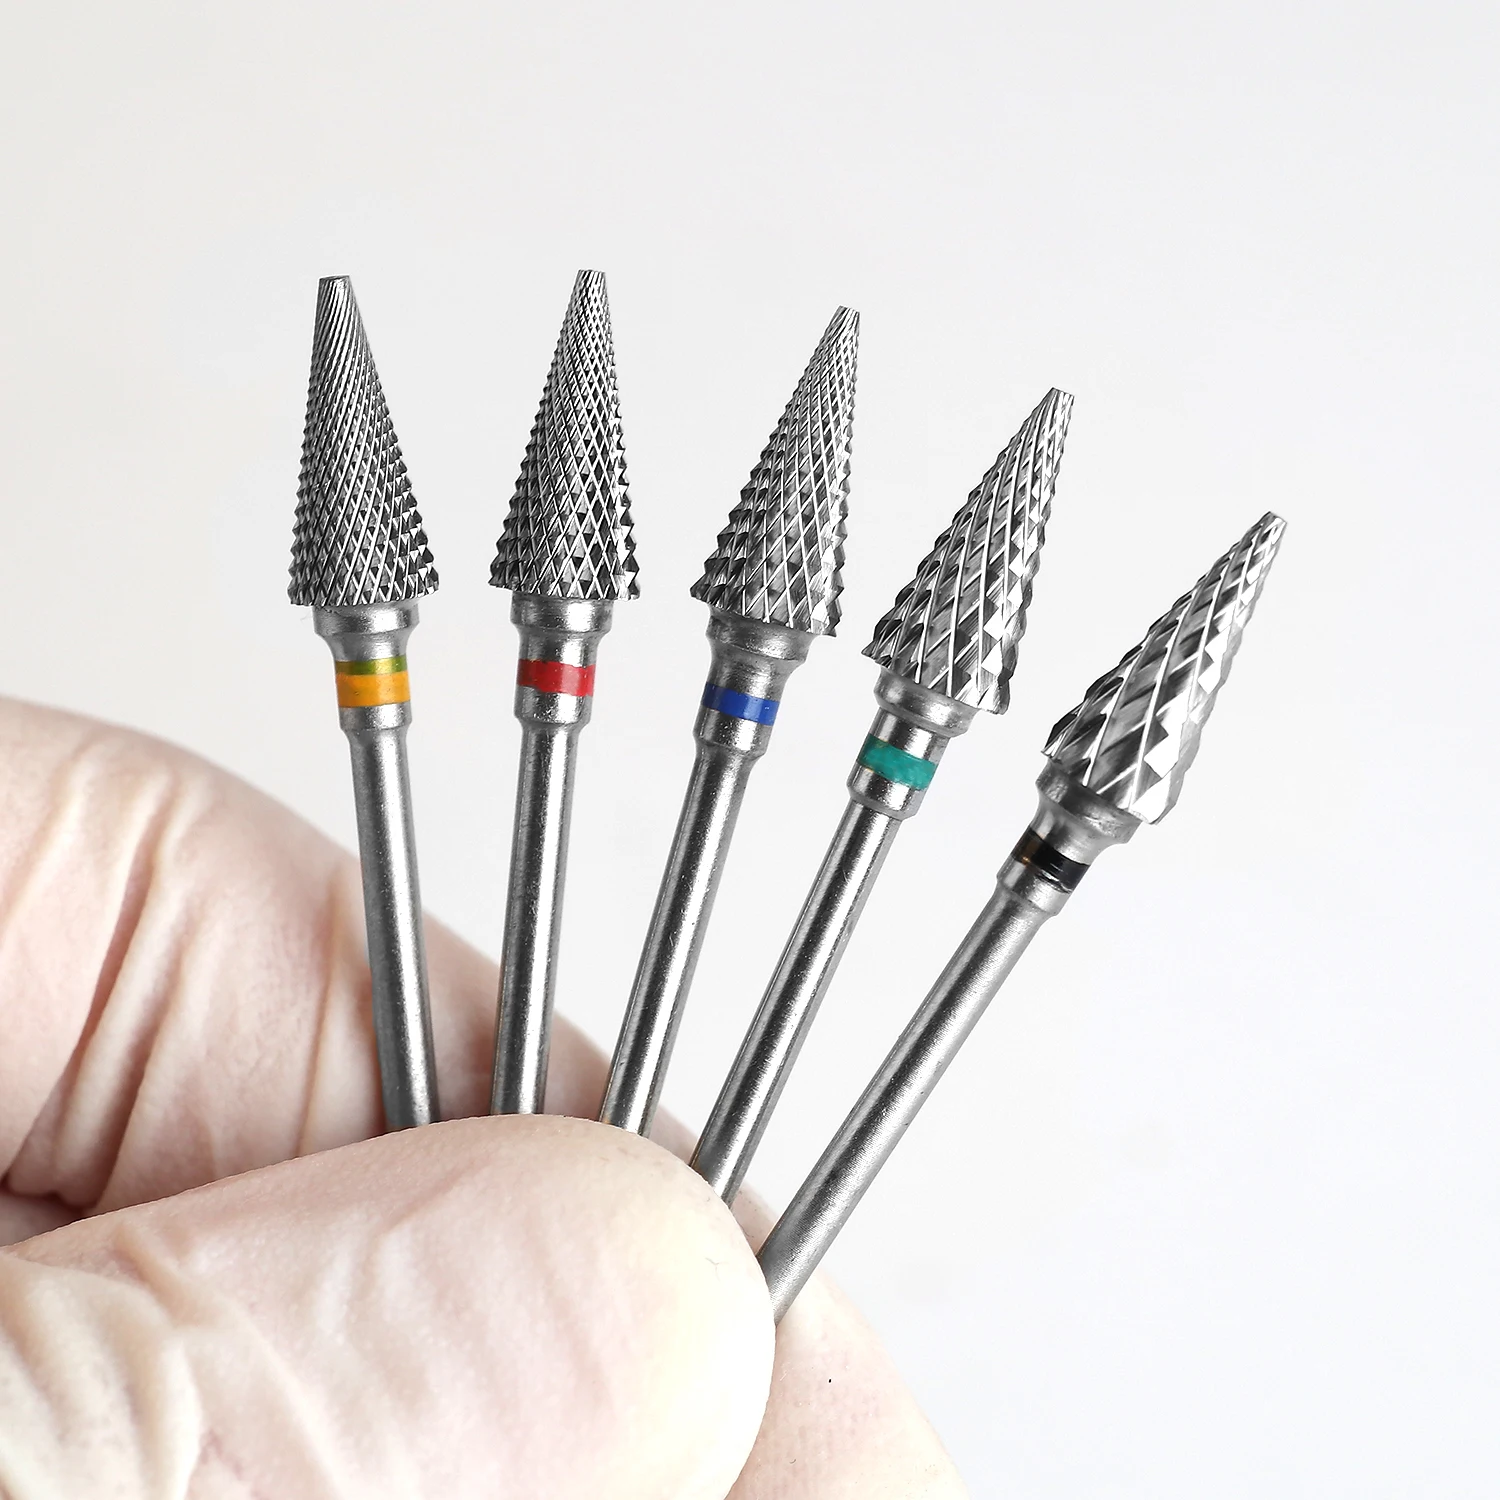 

Conical Cone Nail Bits Uncoated Professional High Quality Manicure Remove Acrylic Gel Tungsten Carbide Nail Drill Bit